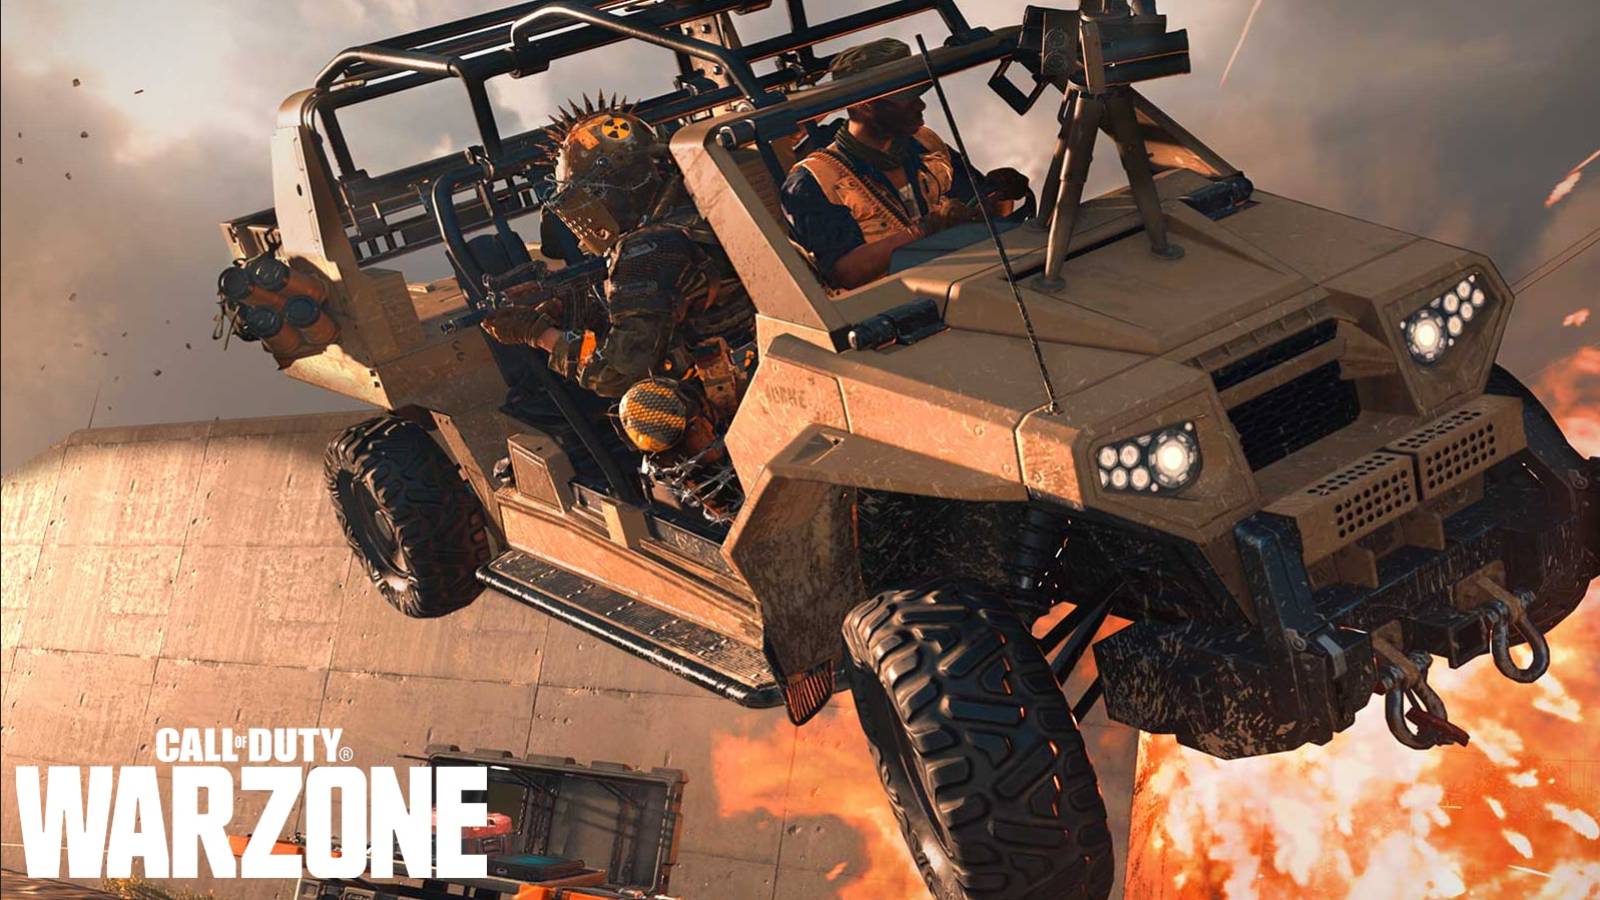 Warzone characters in vehicles